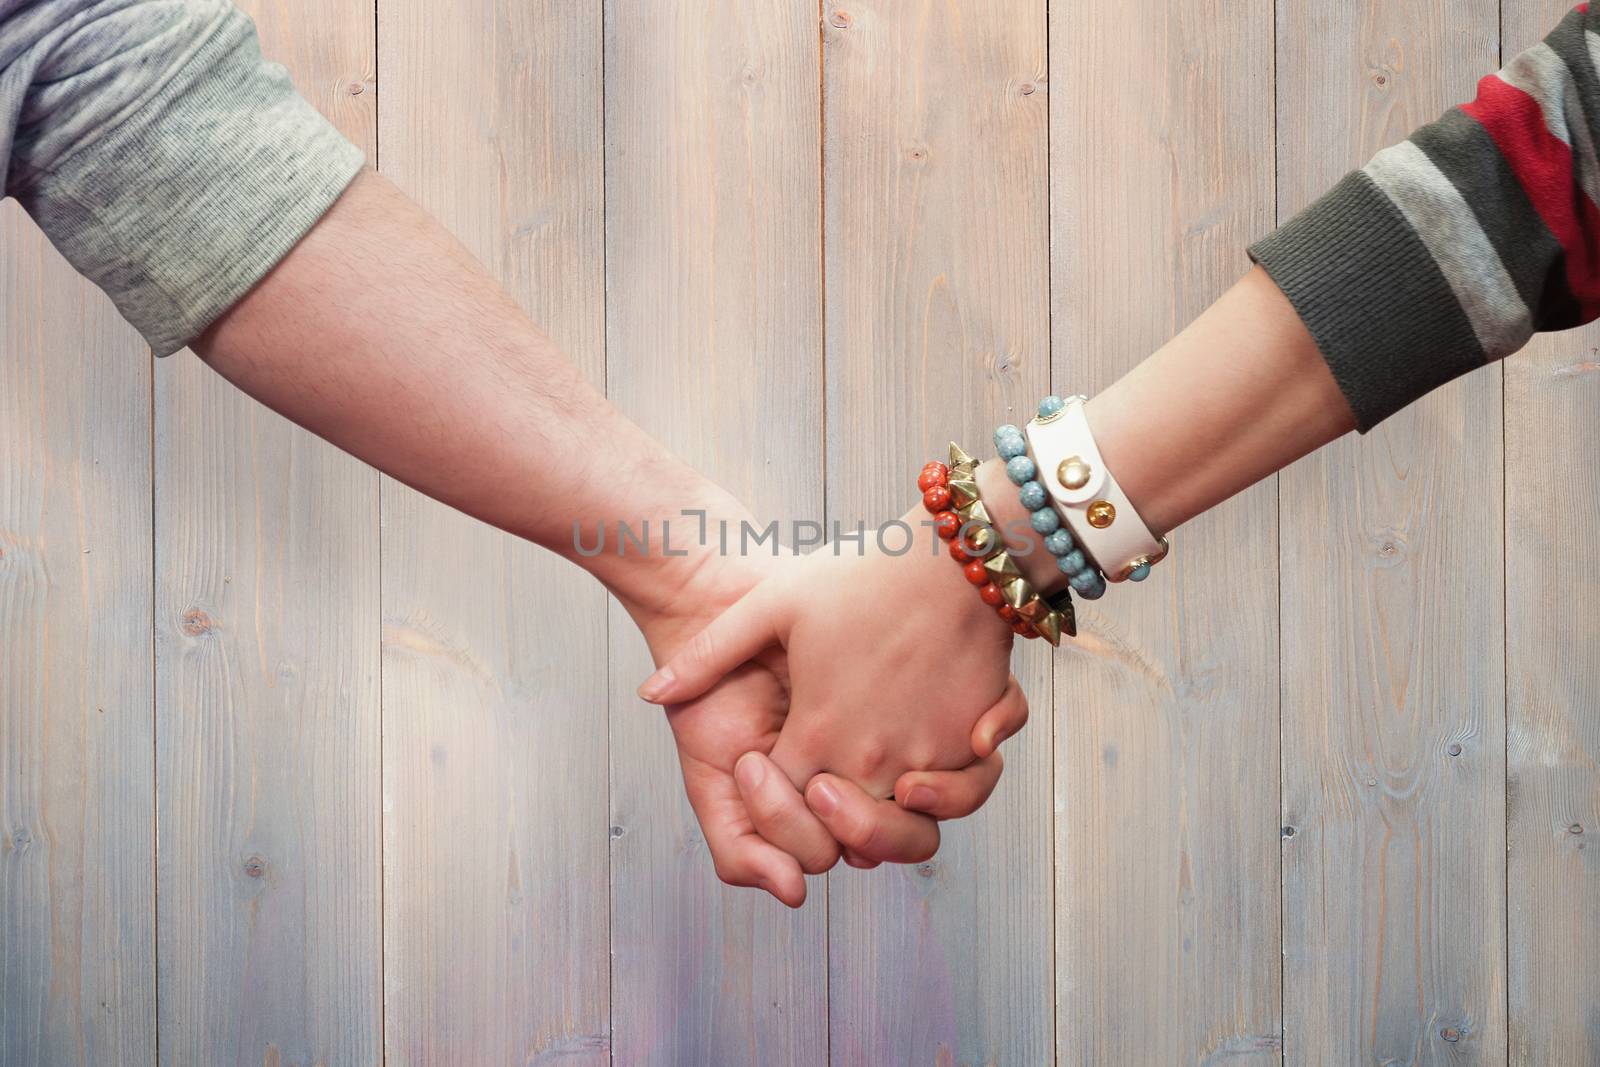 Students holding hands against pale grey wooden planks